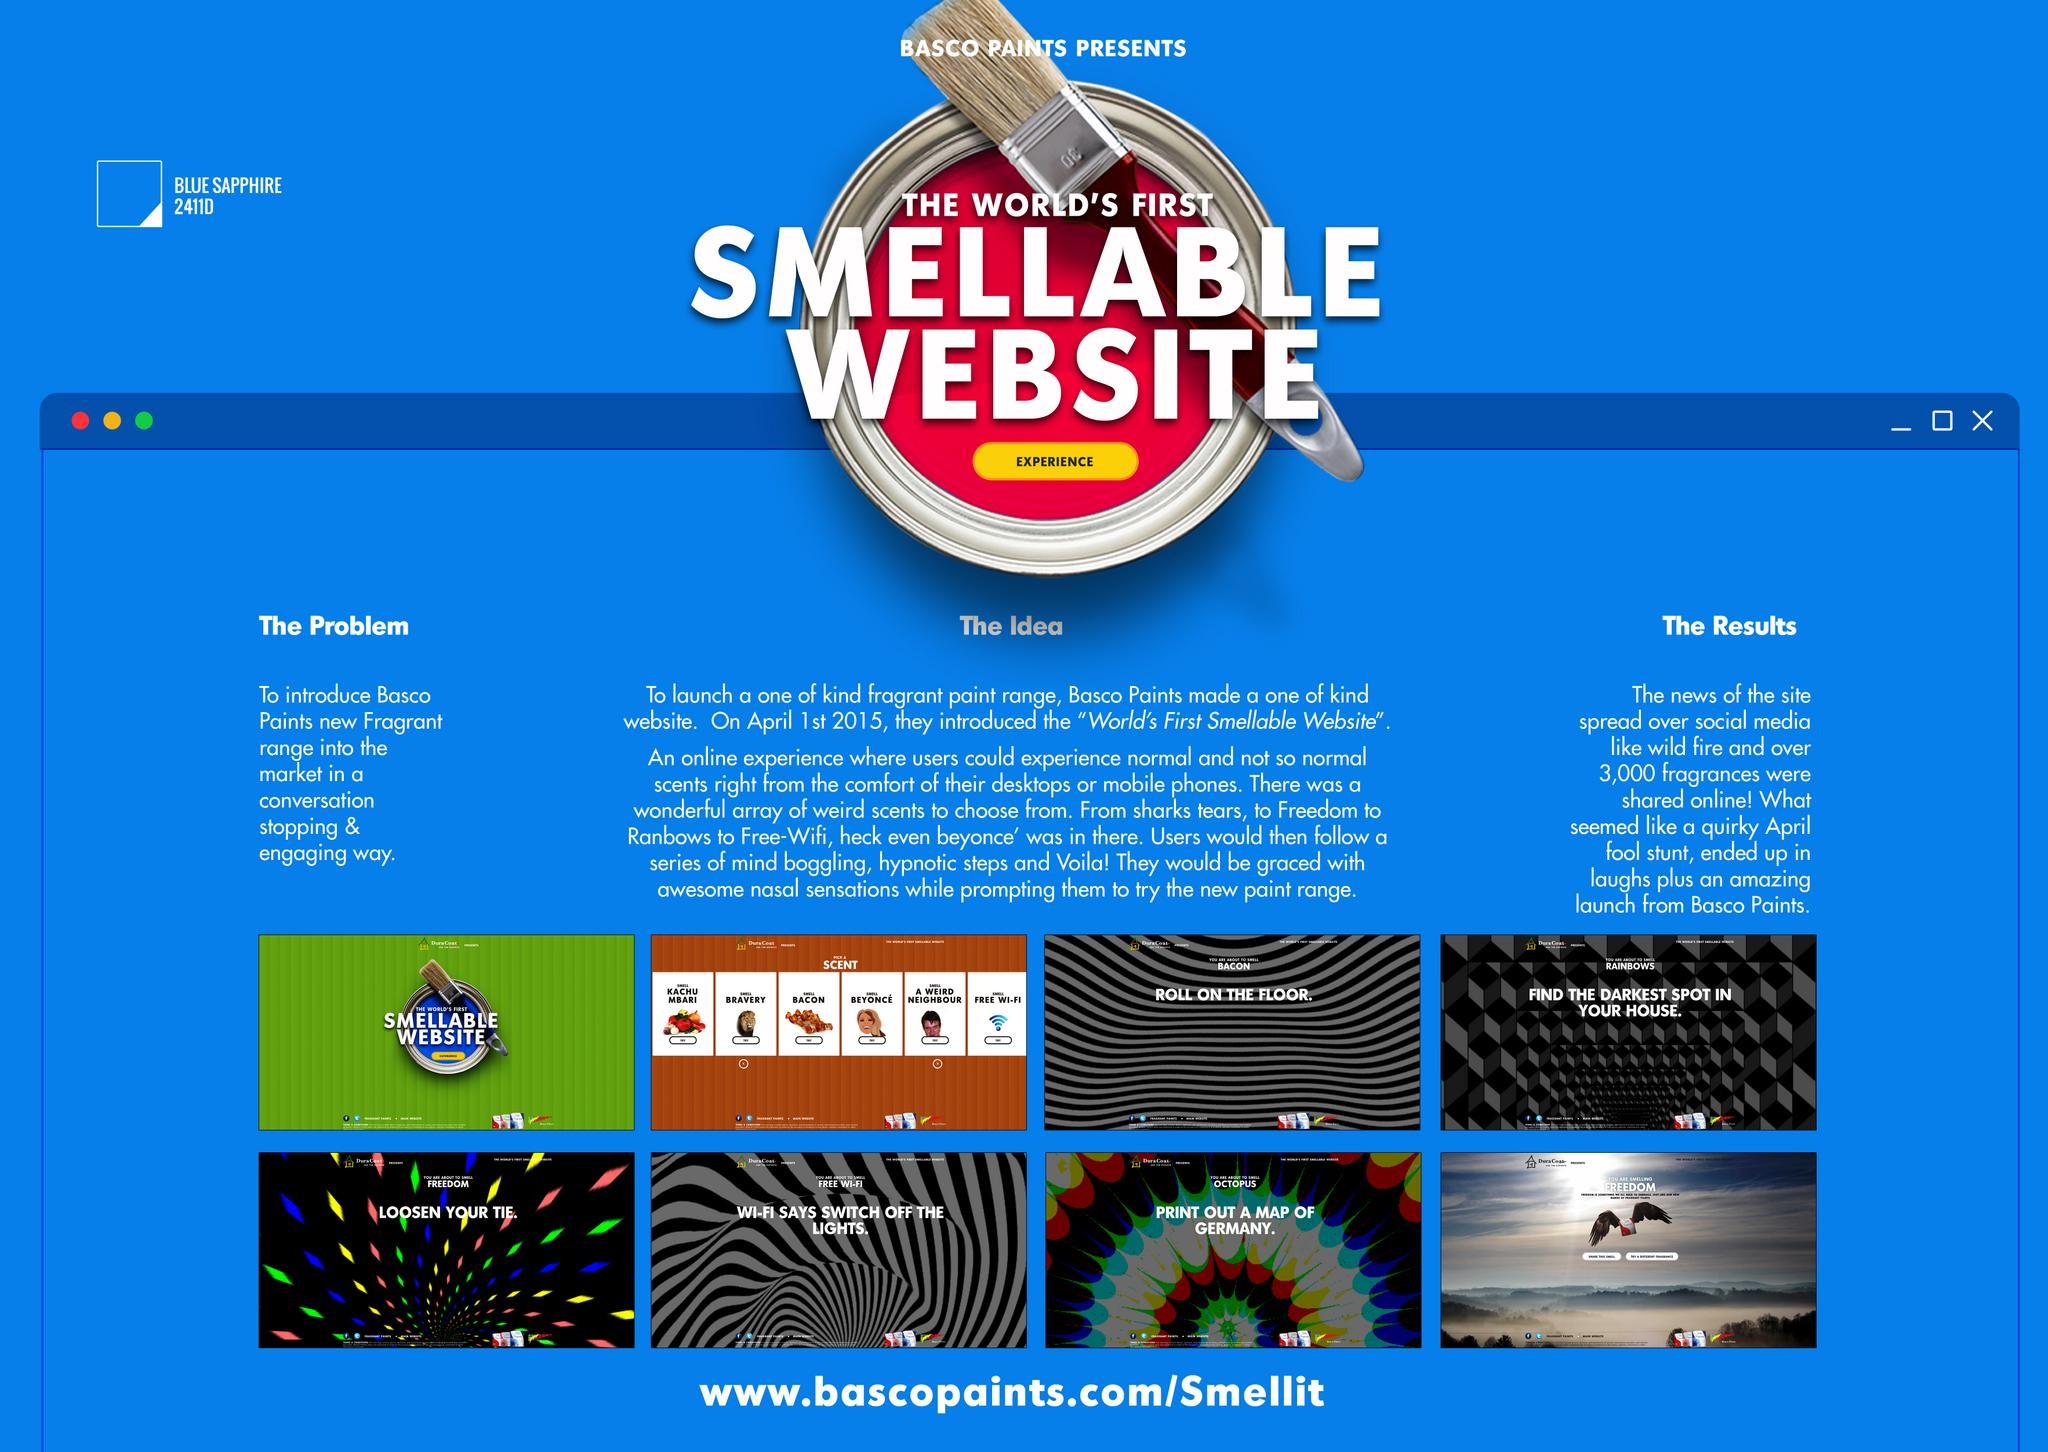 The World's First Smellable Website